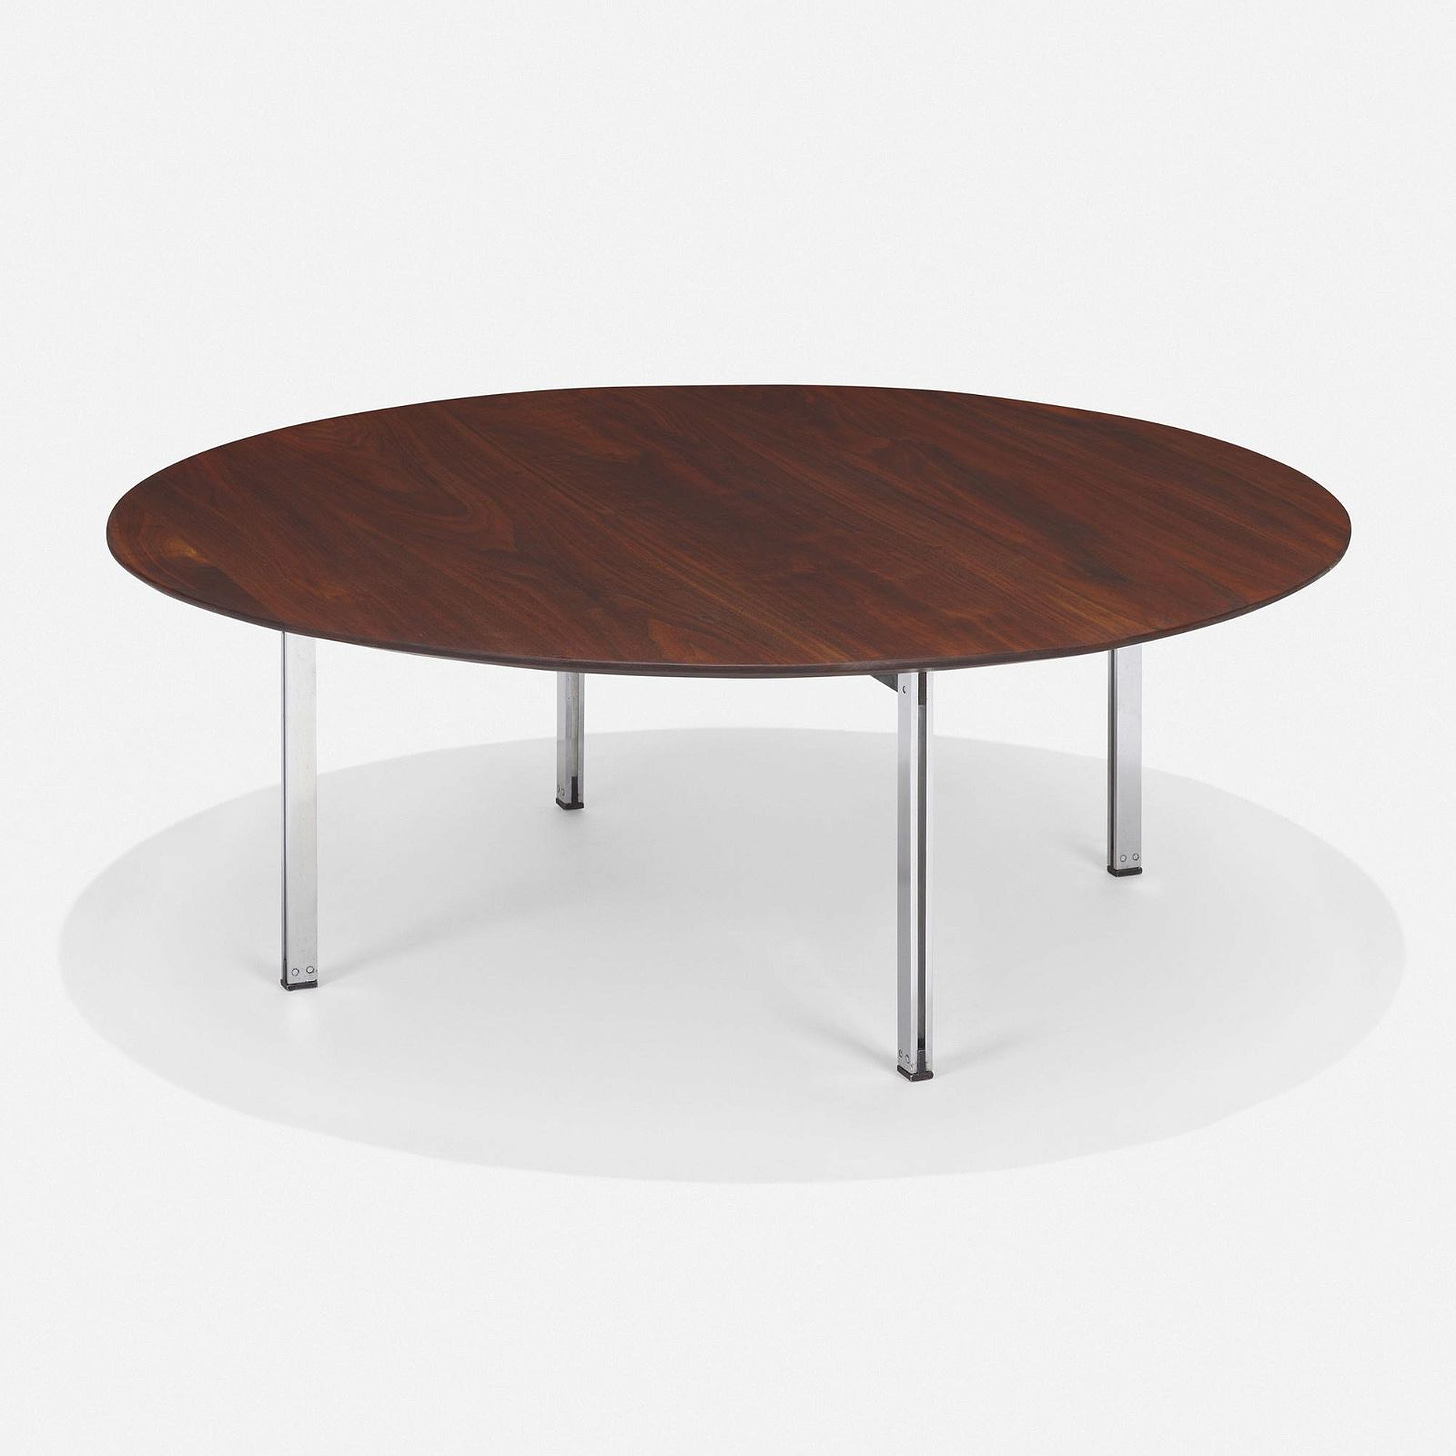 Florence Knoll, Parallel Bar coffee table